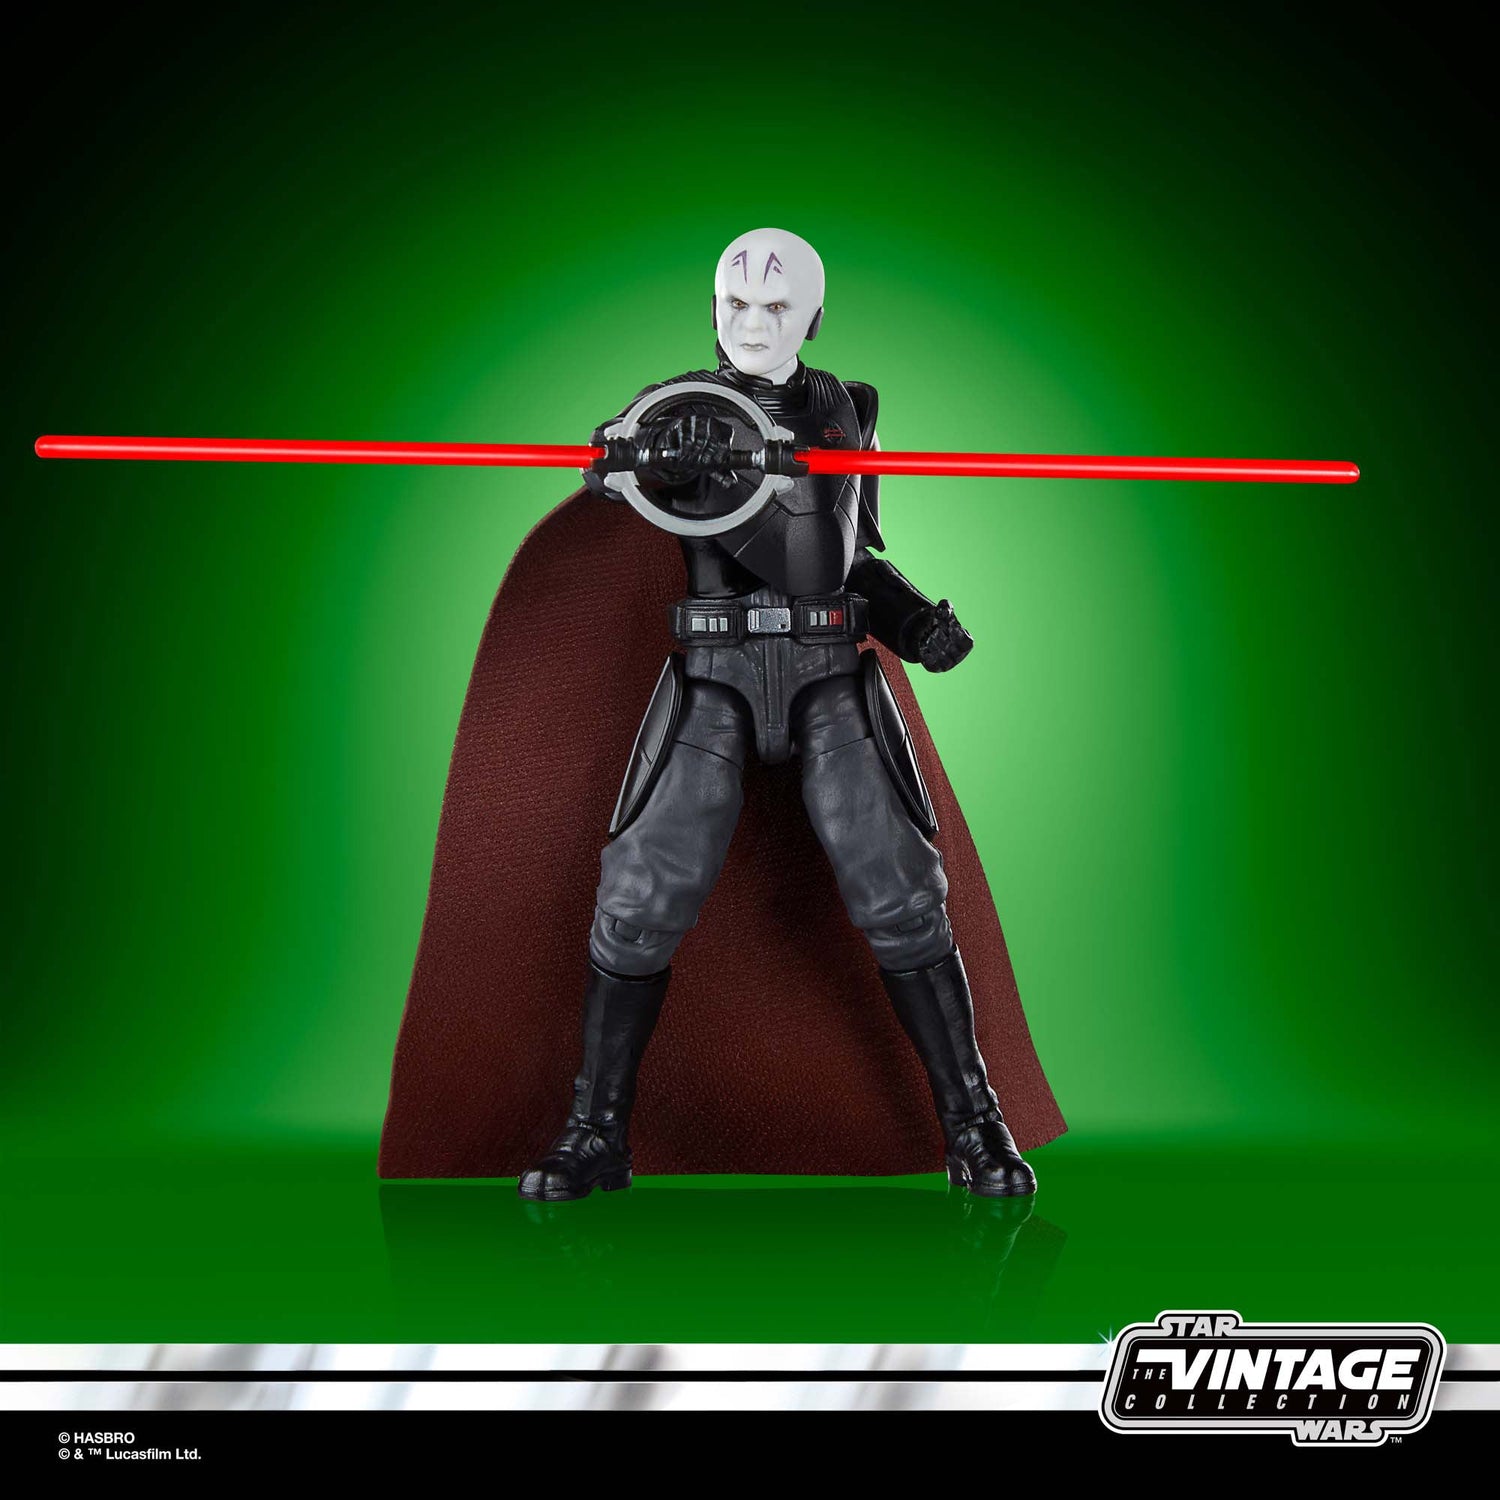 Star Wars: The Vintage Collection Grand Inquisitor Hasbro